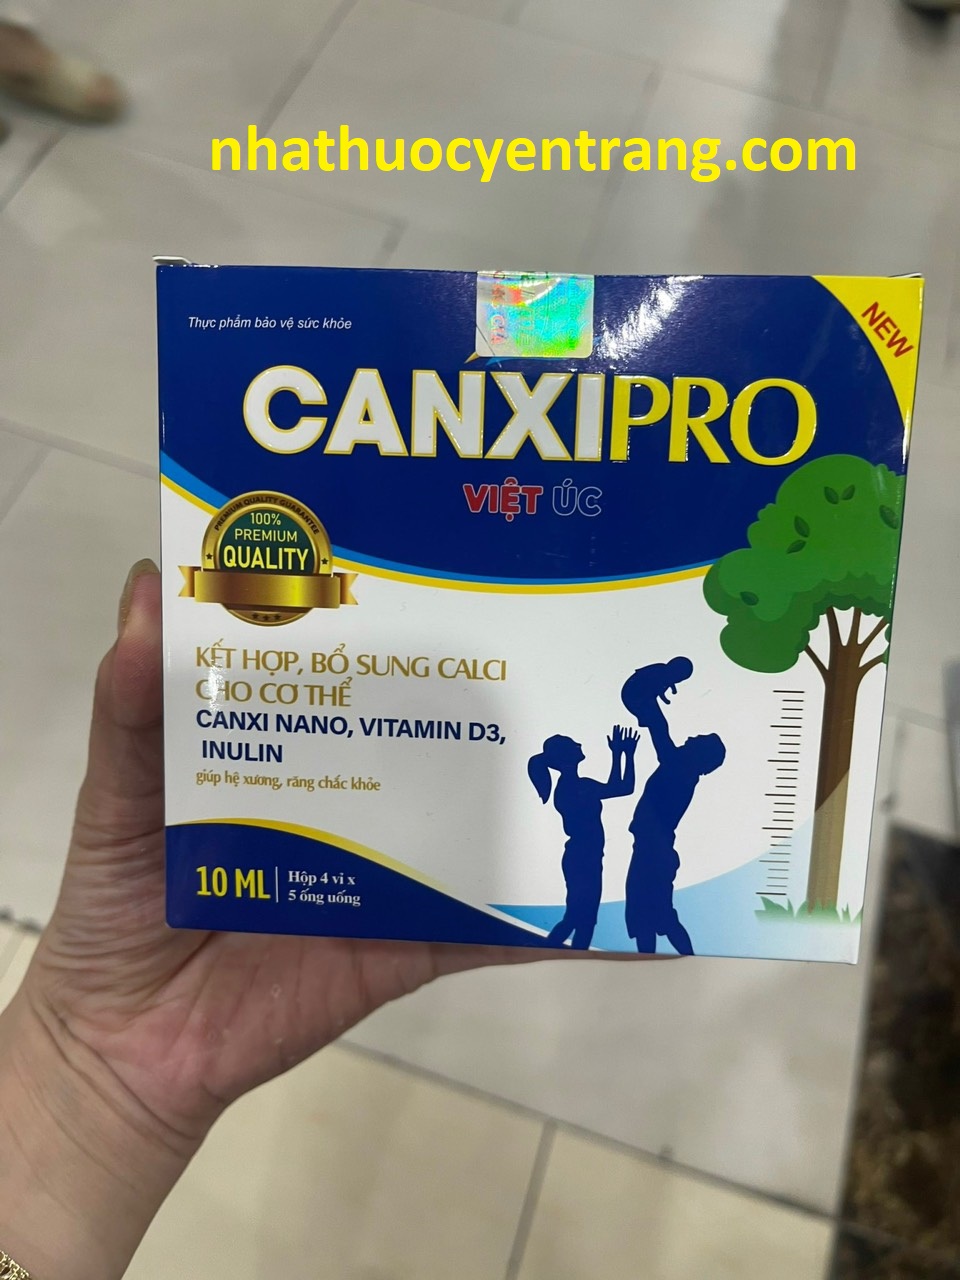 Canxipro